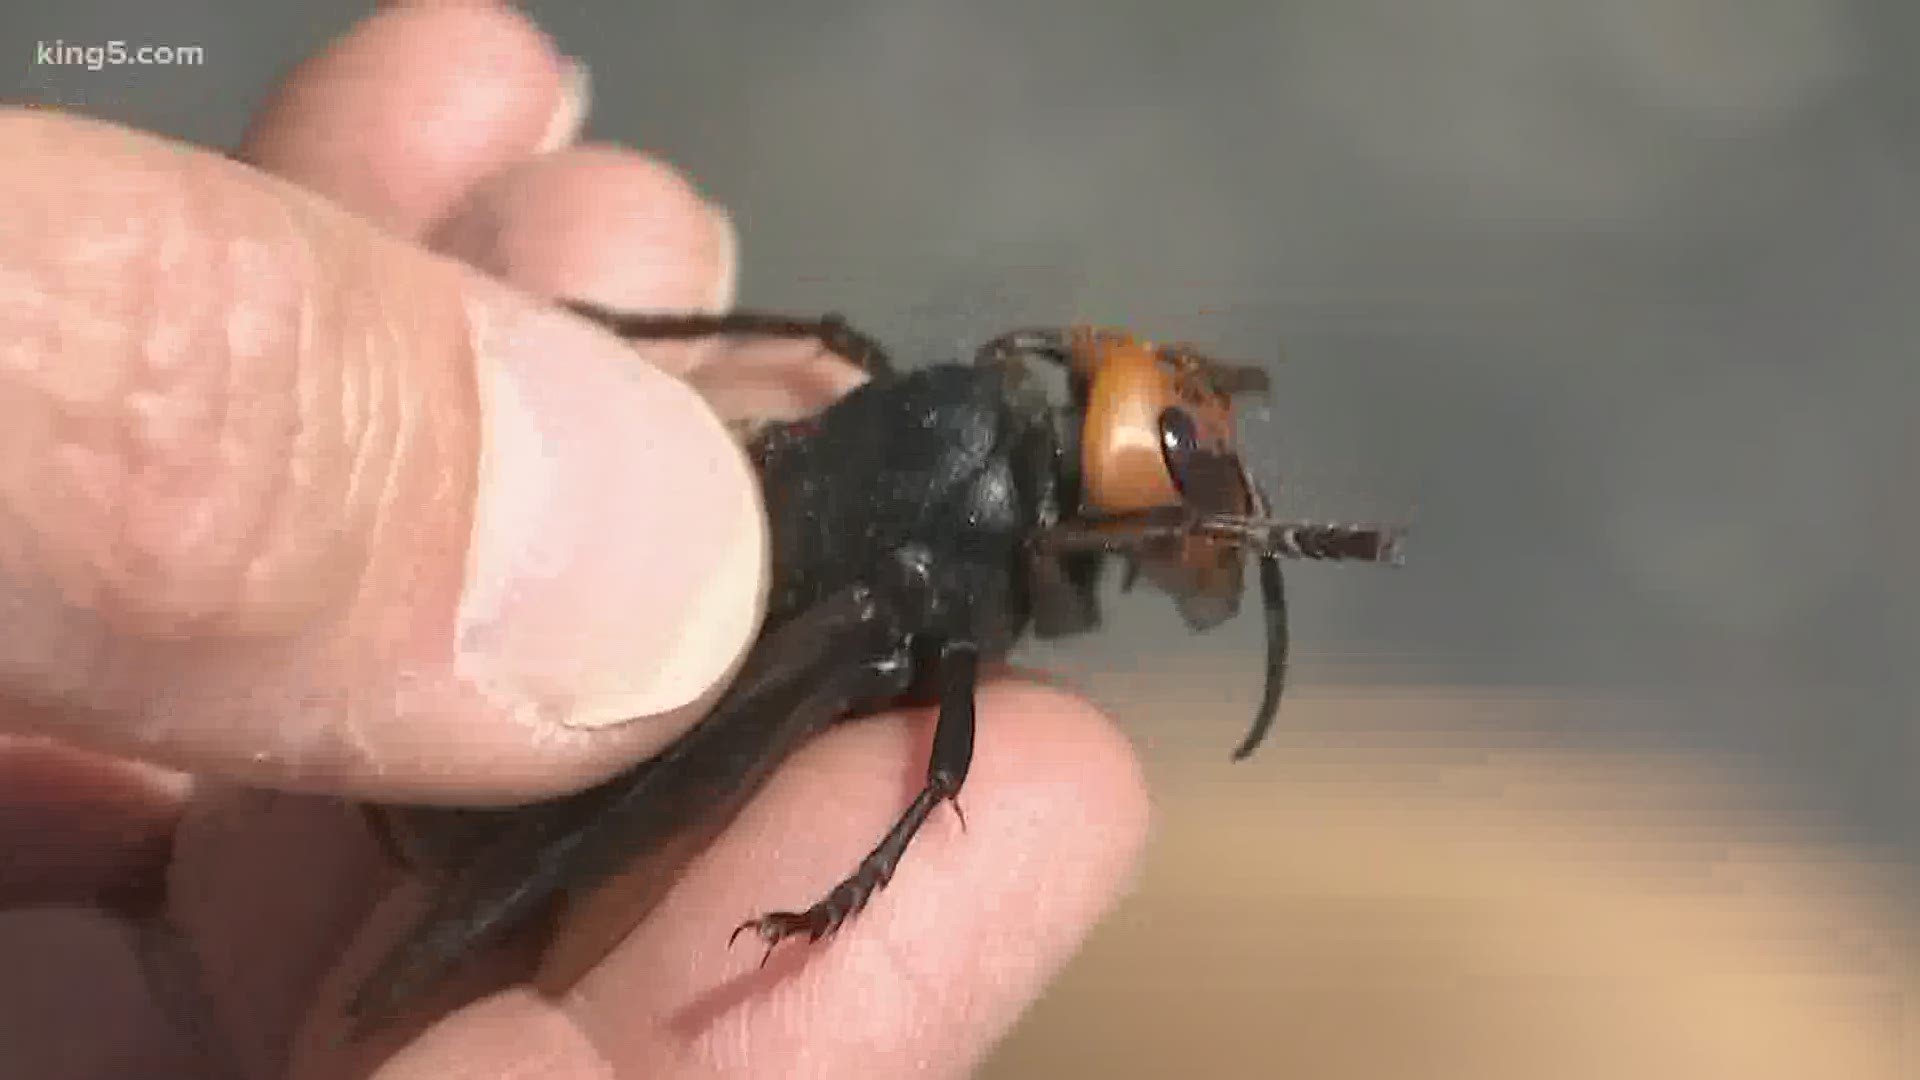 The race is on in Whatcom County to catch and eradicate a large, bee-killing pest. Scientists are working fast so the Asian giant hornets do not take over.